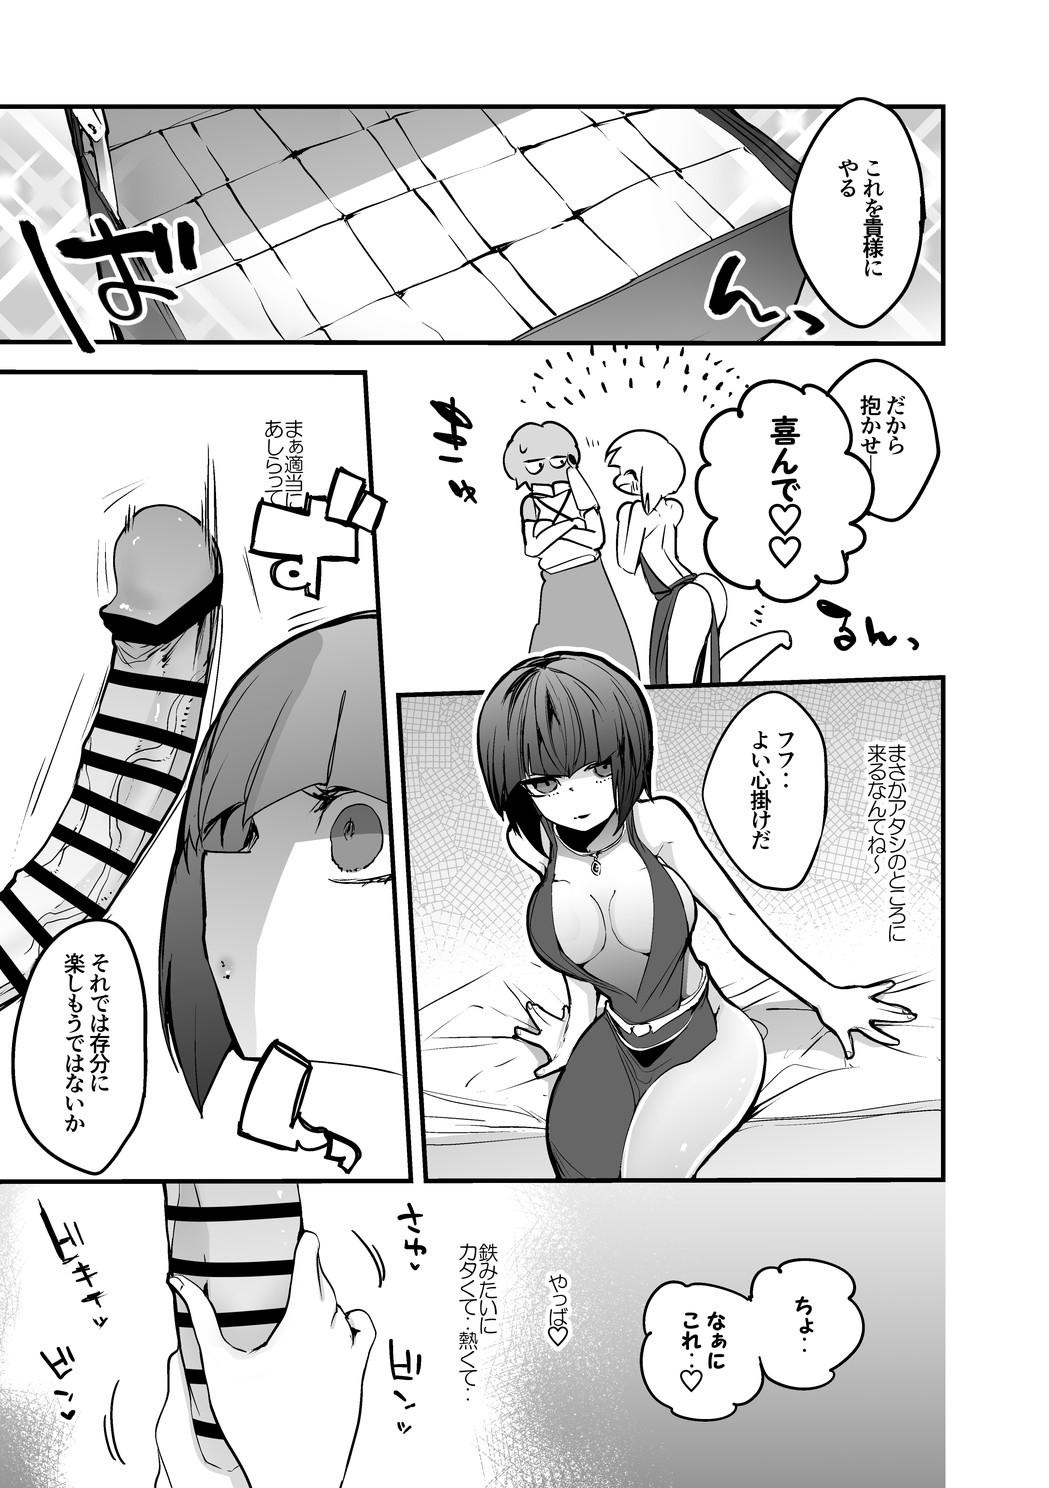 Webcam なびきは許しちゃう編 - Ranma 12 Indoor - Page 2